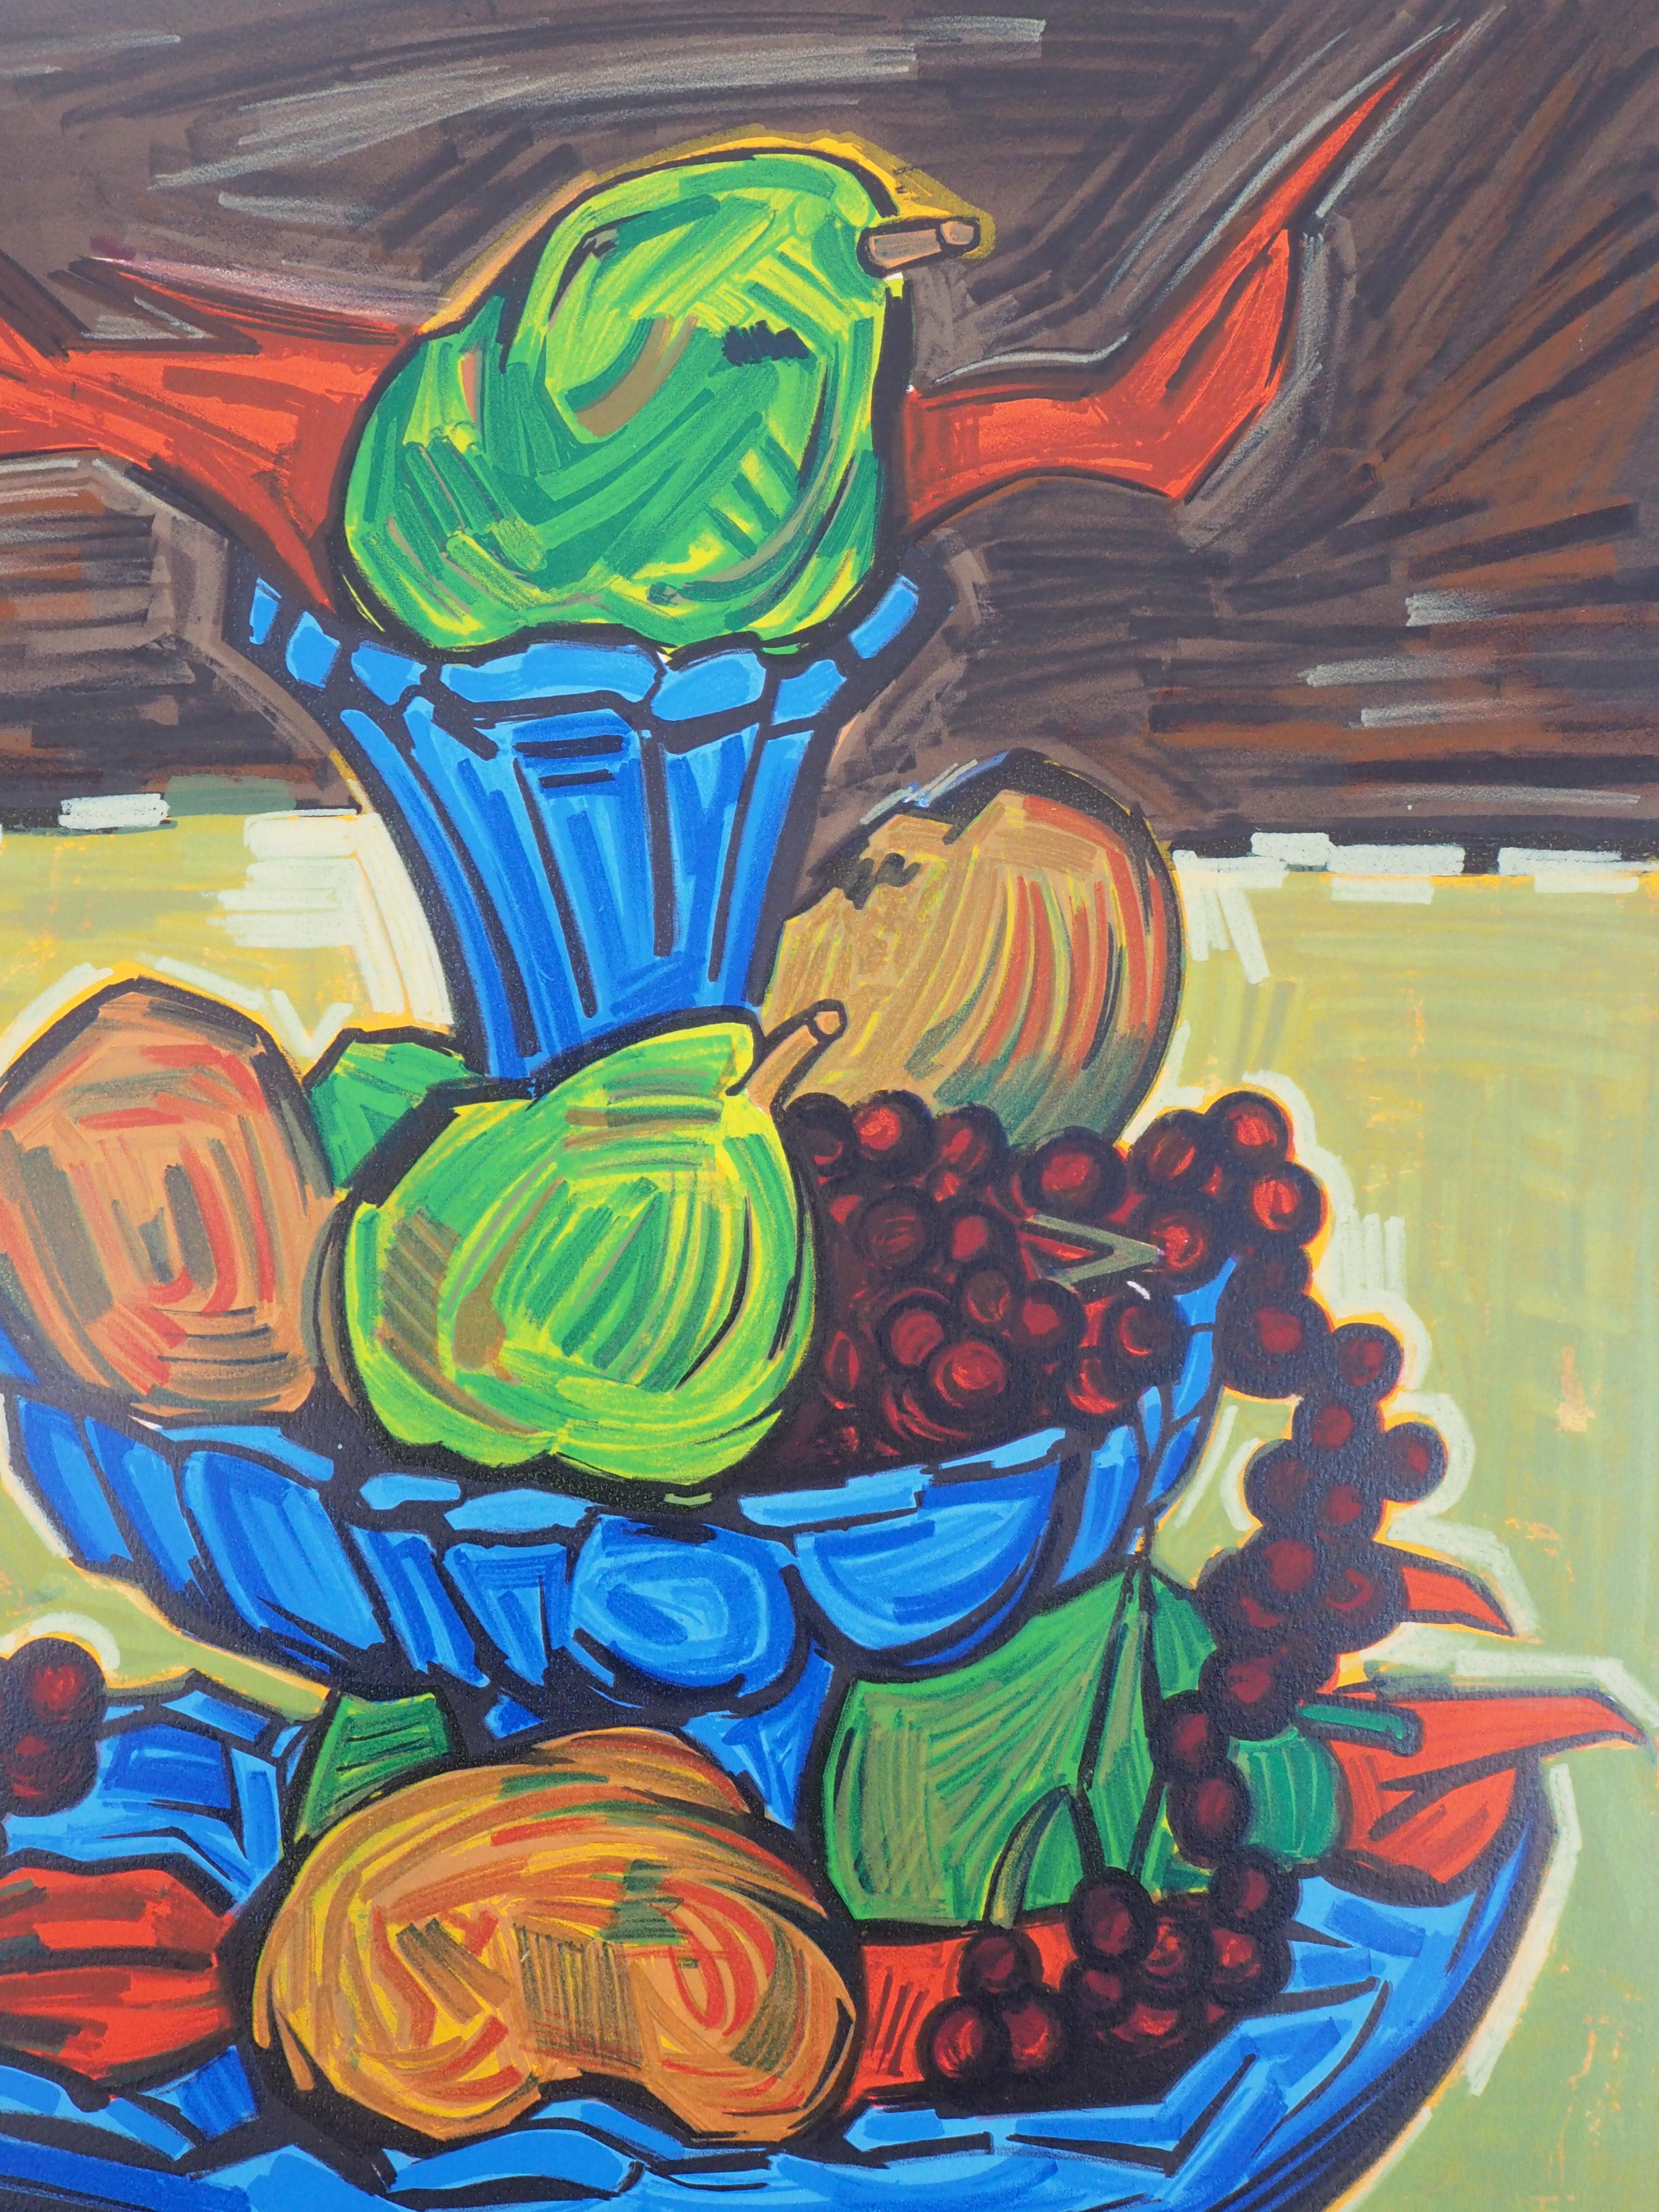 Still Life with Fruits - Original Lithograph Handsigned and Numbered (Mourlot) - Modern Print by Isis Kischka